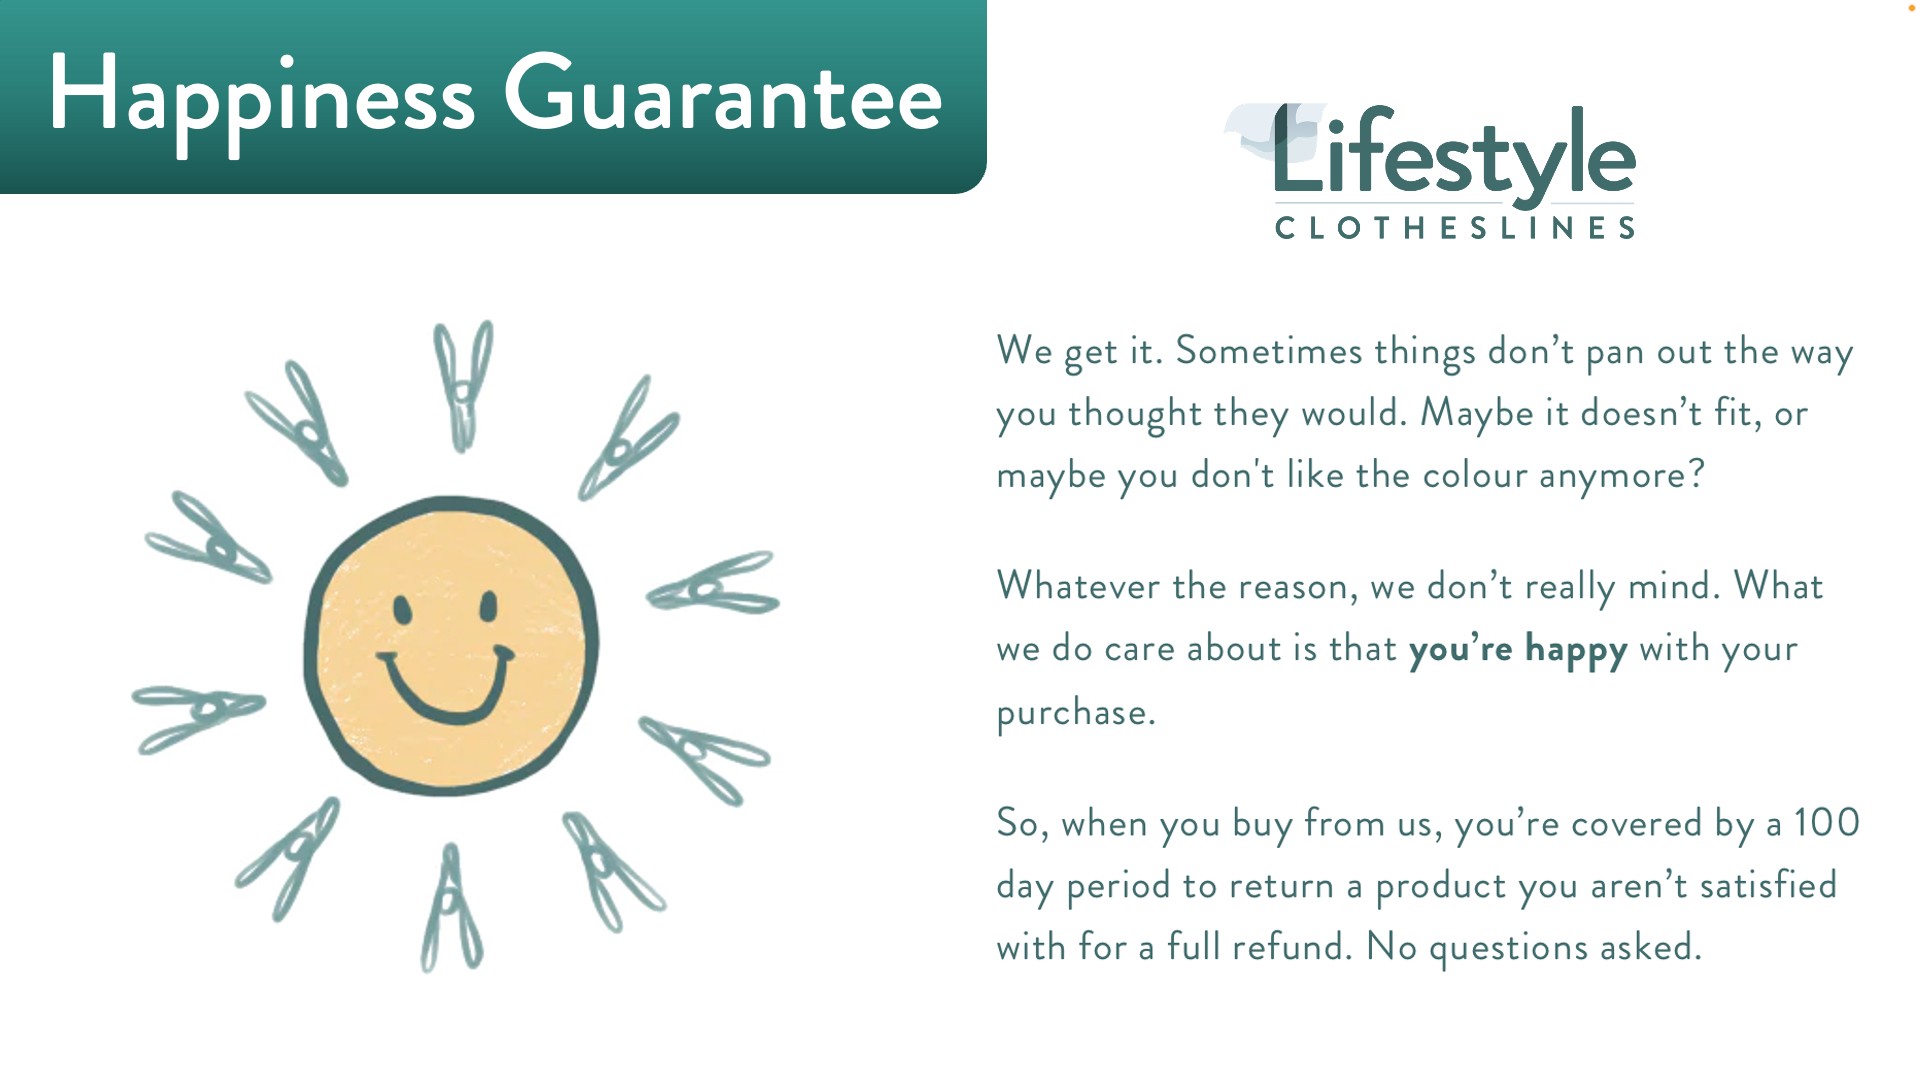 2.5m clothesline purchase 100 day happiness guarantee